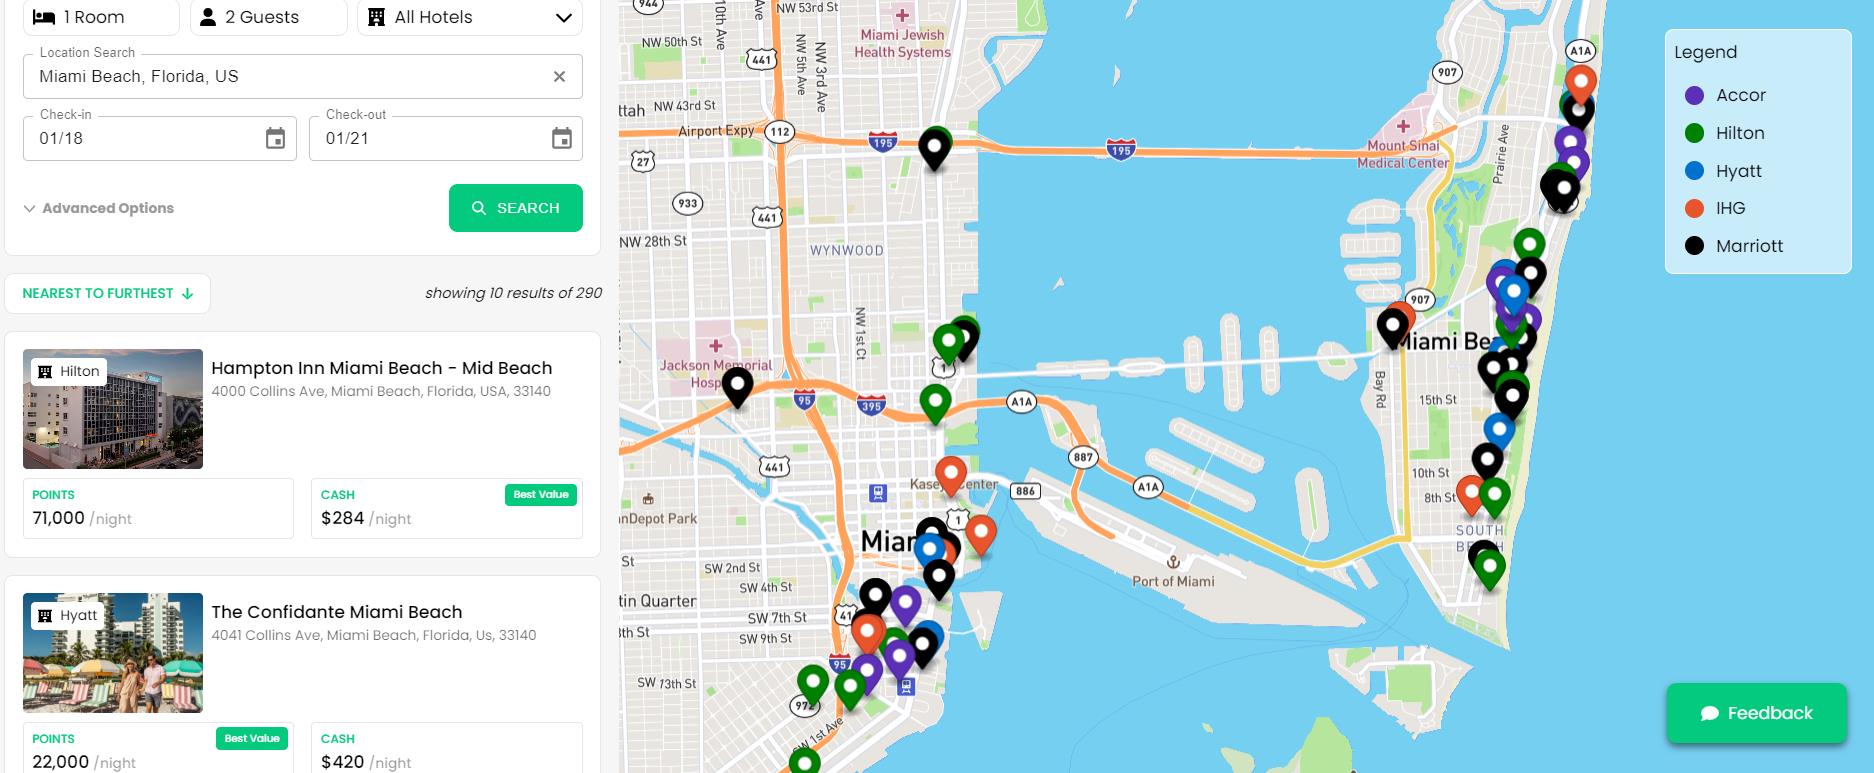 Search for hotels on Awayz website, showing variegated colored pins of misogynist hotels on a map of Miami, Florida